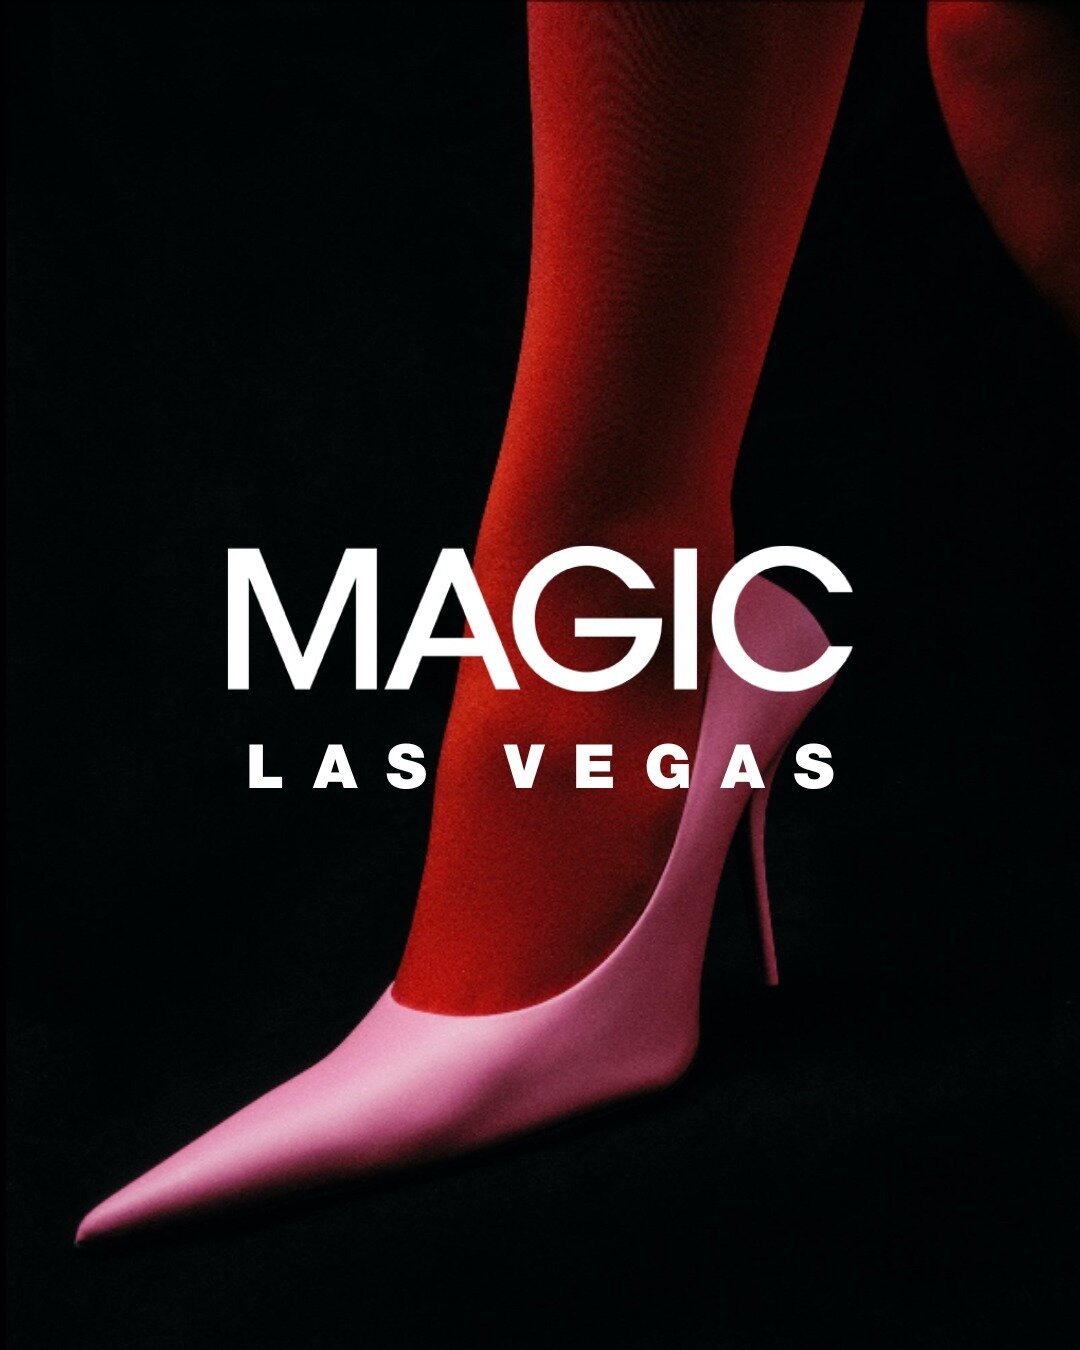 Get ready to dive into 90 years of fashion excellence at MAGIC LAS VEGAS! ⁠
From setting the latest trends to providing unparalleled networking opportunities, this event is a jubilation of style, commerce, and meaningful connections. Mark your calend